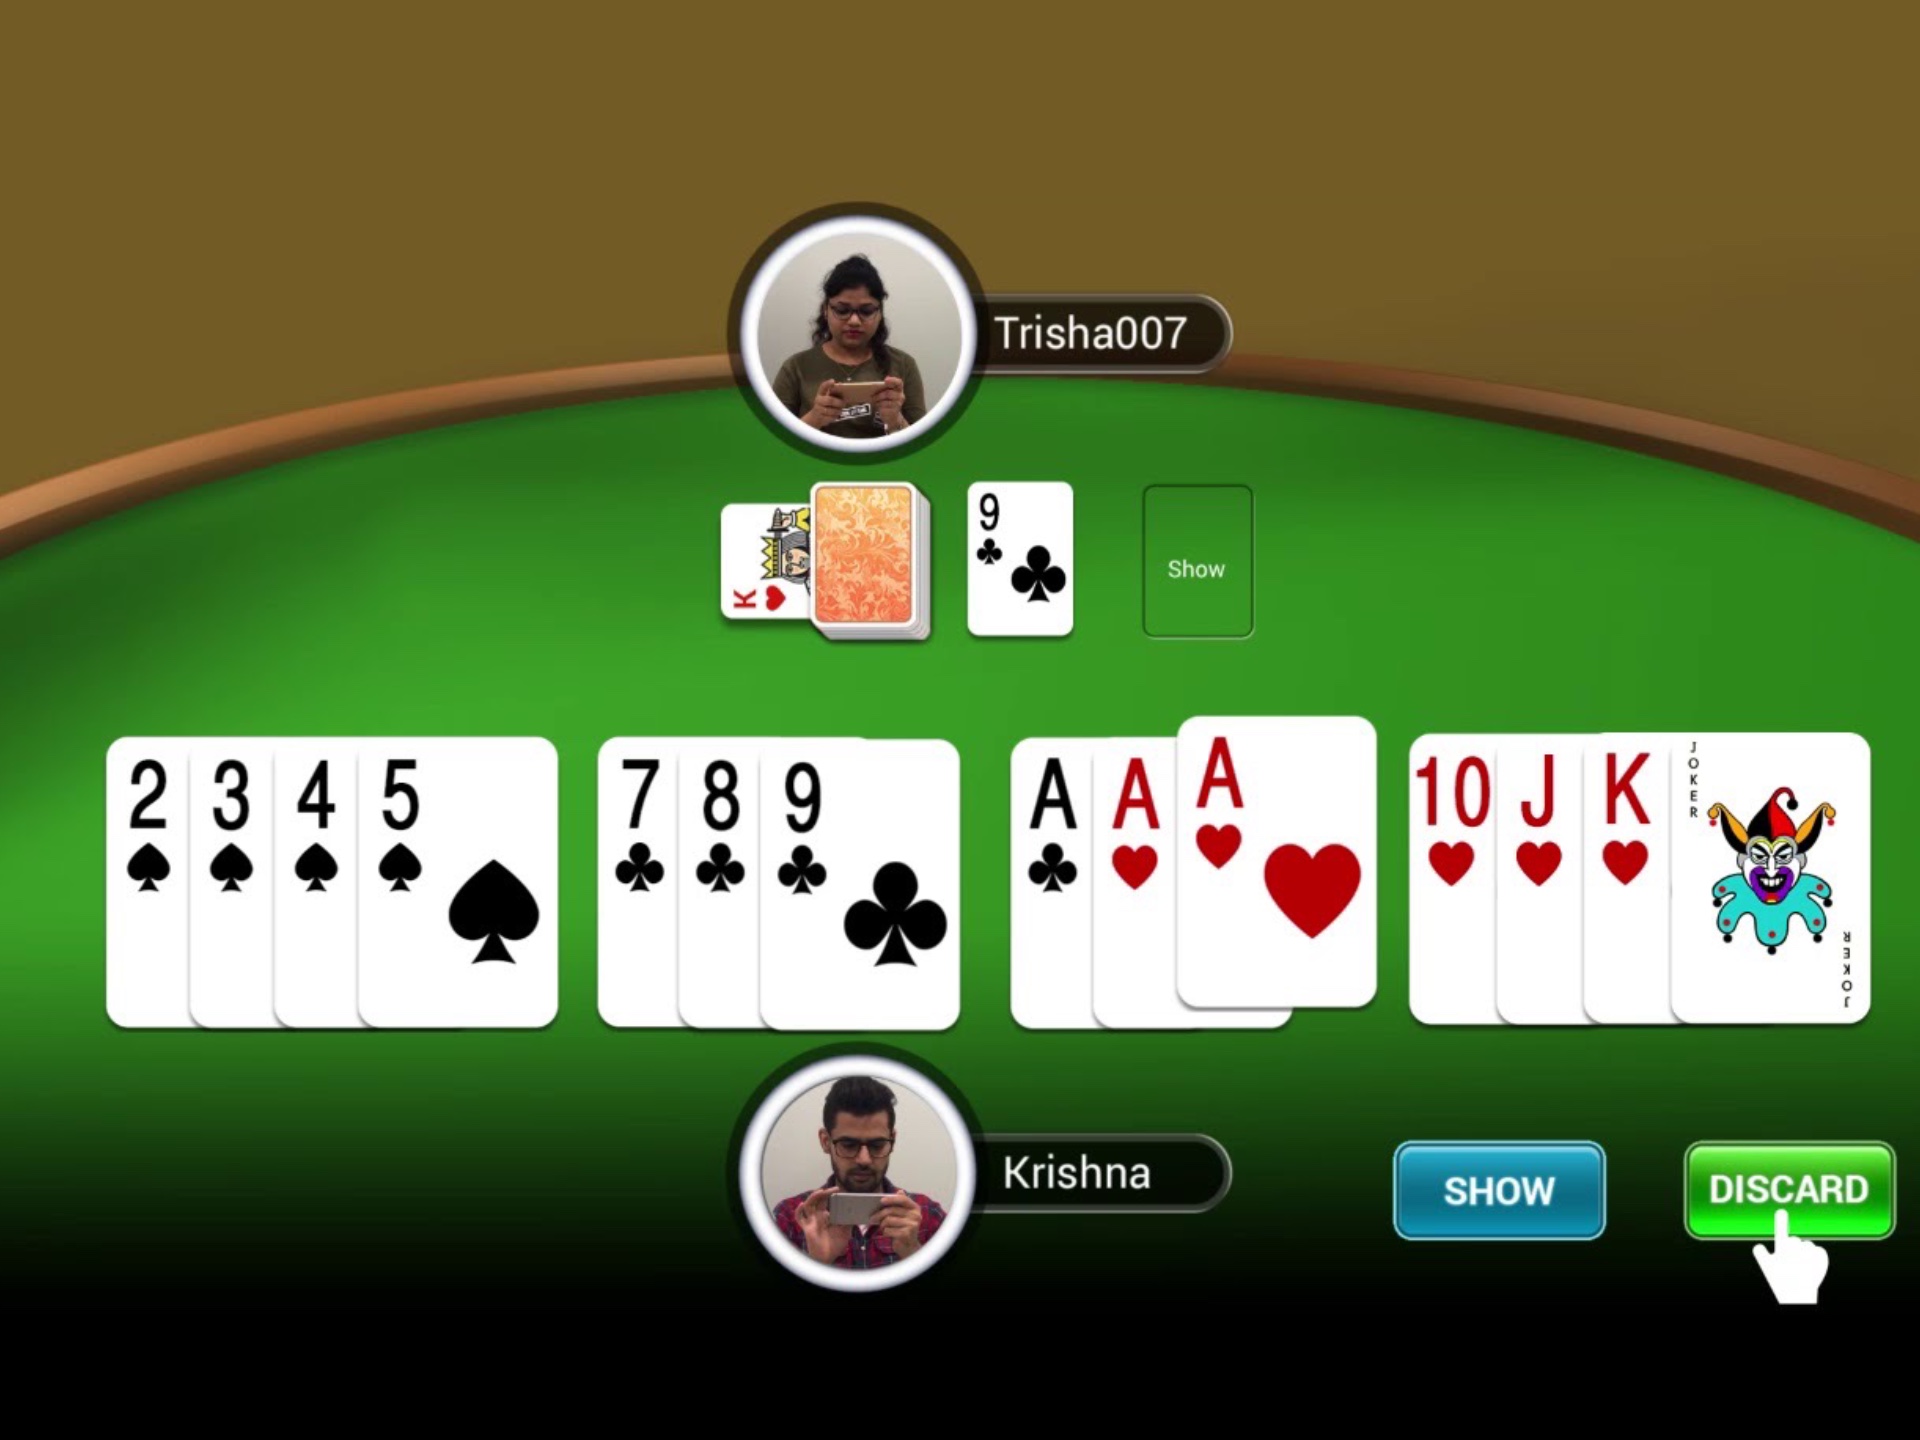 How to play online rummy step by step guide